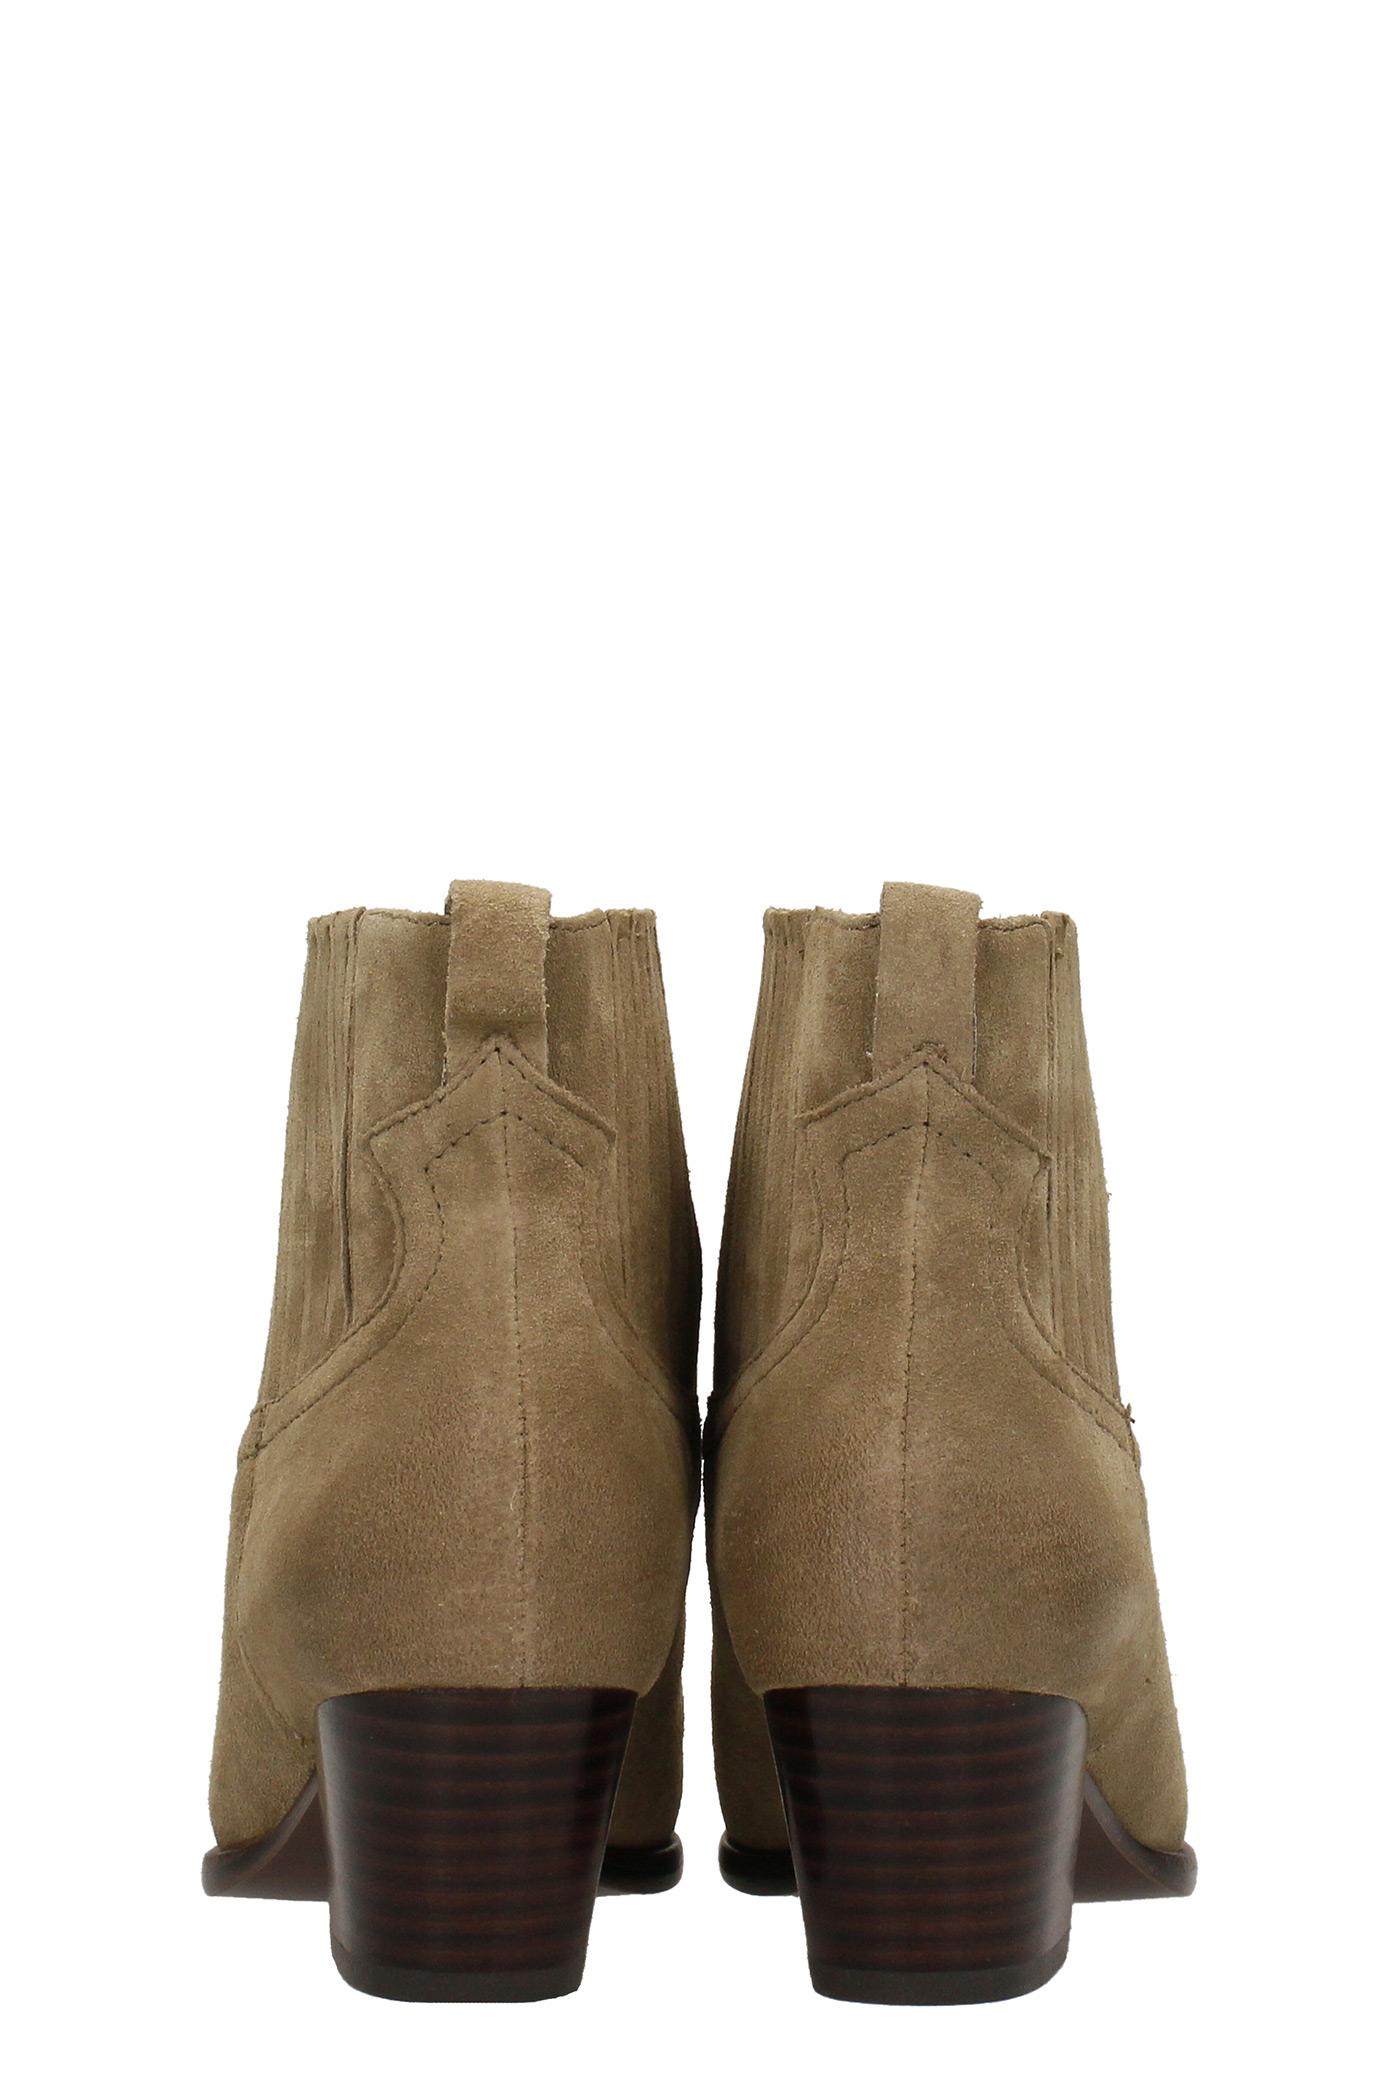 Ash Harper Texan Ankle Boots In Suede in Natural | Lyst